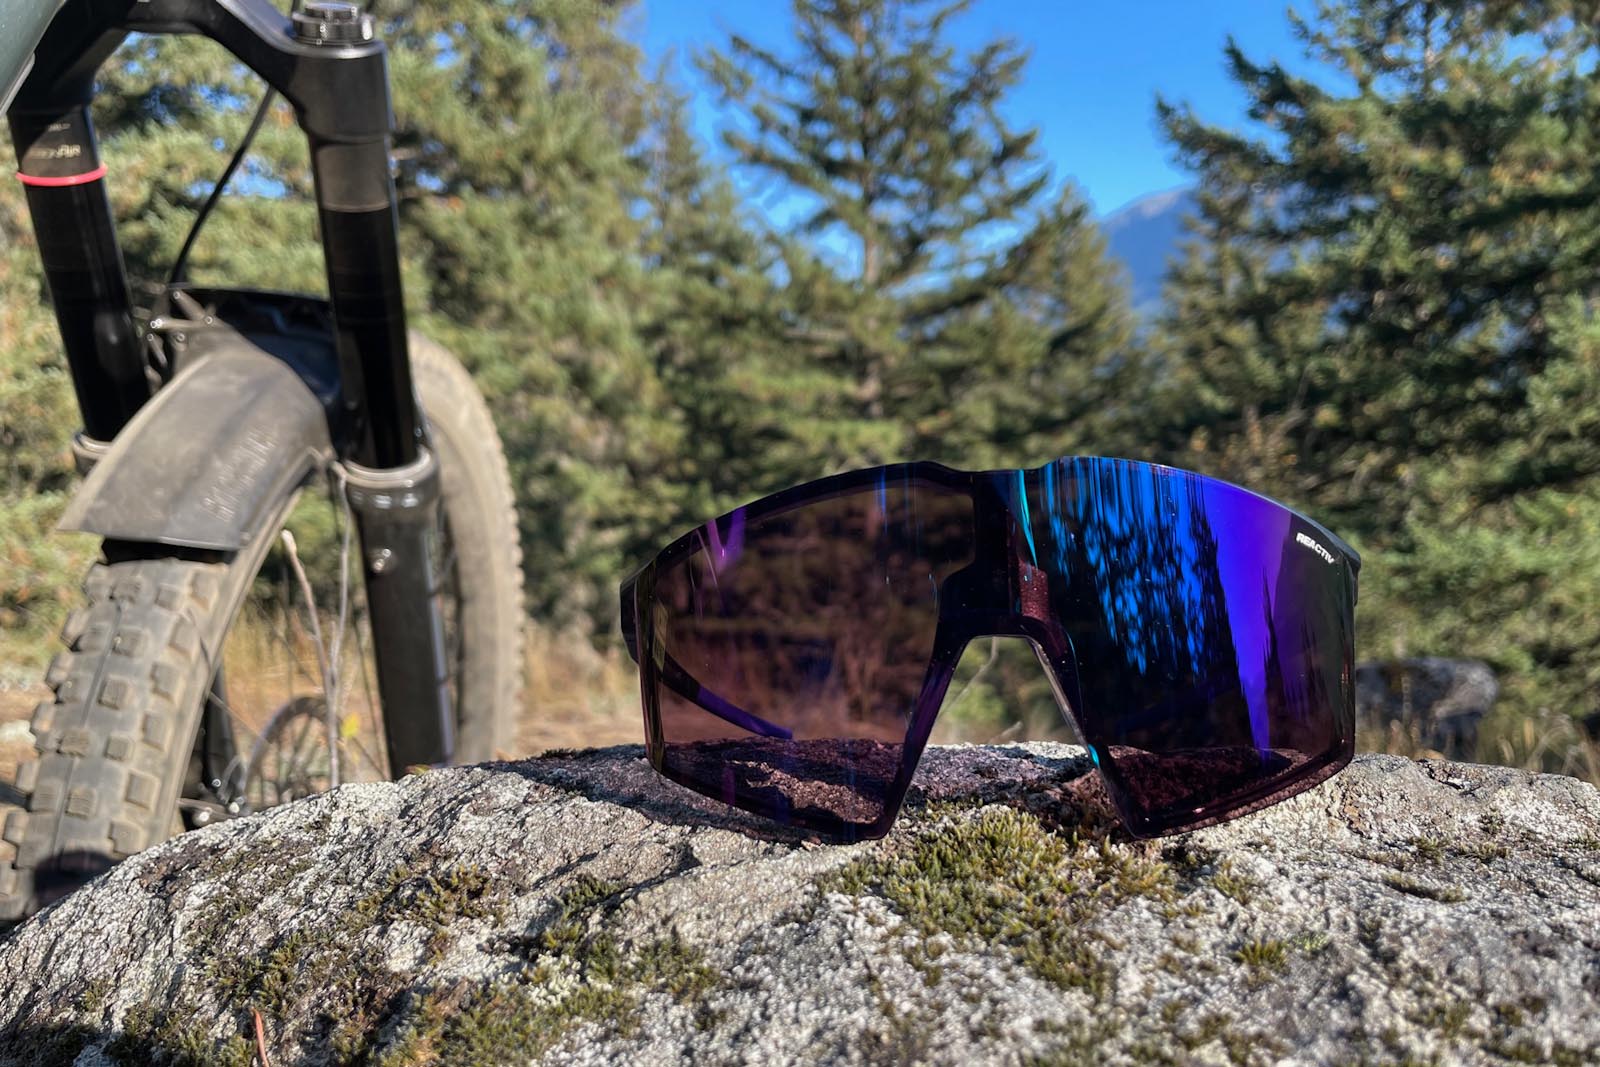 Julbo Edge Sunglasses Offer Great Coverage For Any Weather Conditions